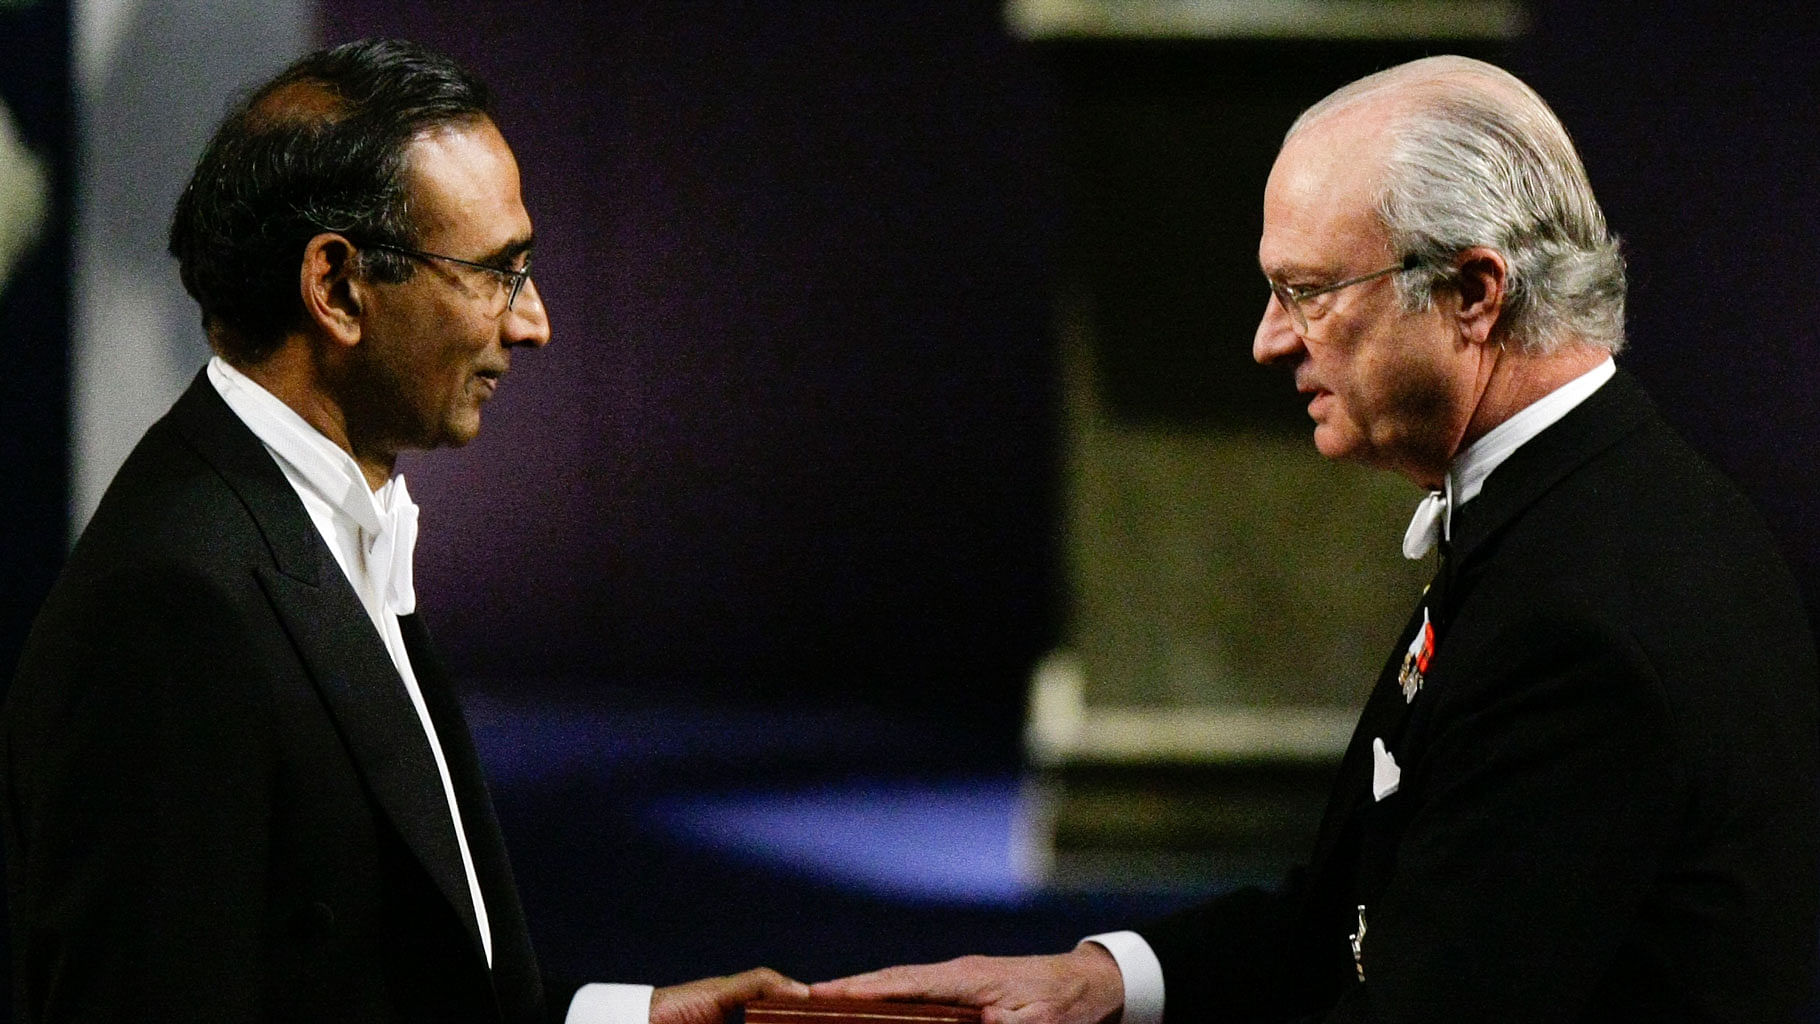 File image of Venkatraman Ramakrishnan receiving the 2009 Nobel Prize in Chemistry from Sweden’s King Carl XVI Gustaf. (Photo: Reuters)<a href="http://www.thequint.com/section/India"></a>